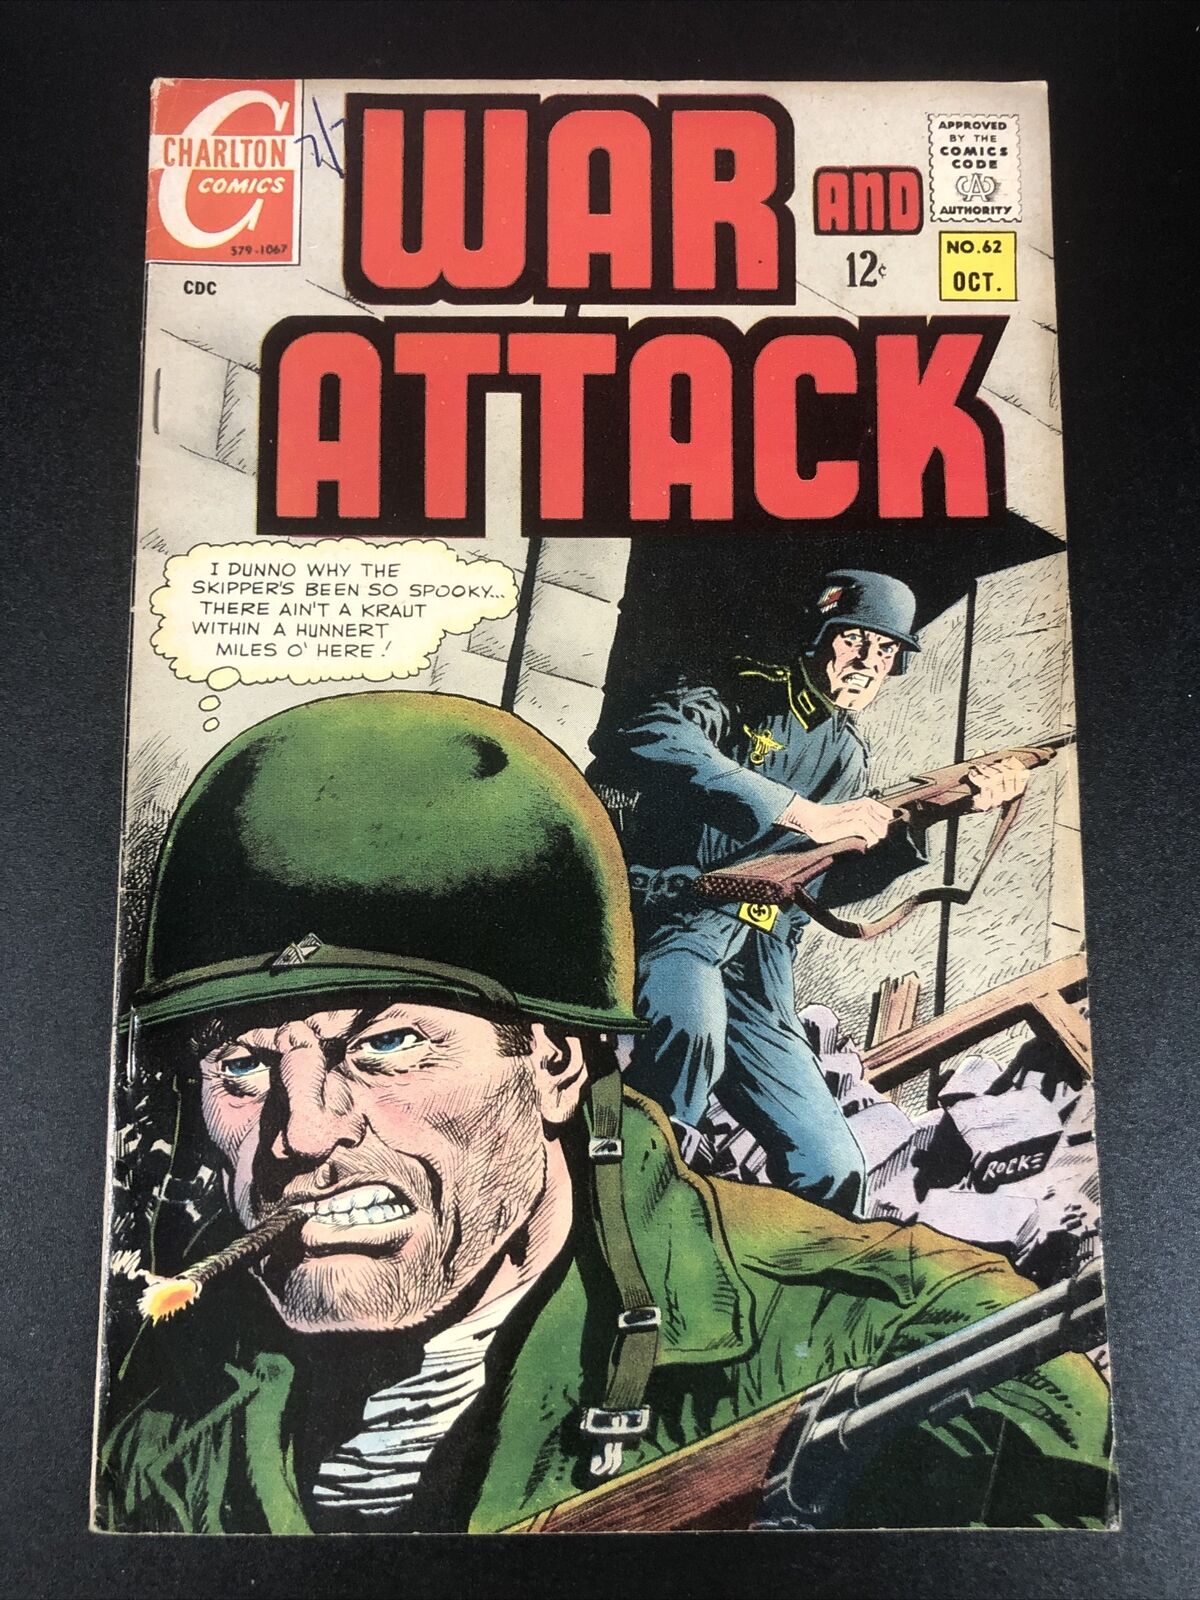 War And Attack Volume 2 #62 Charlotte Comics GD Oct 1967 Silver Age